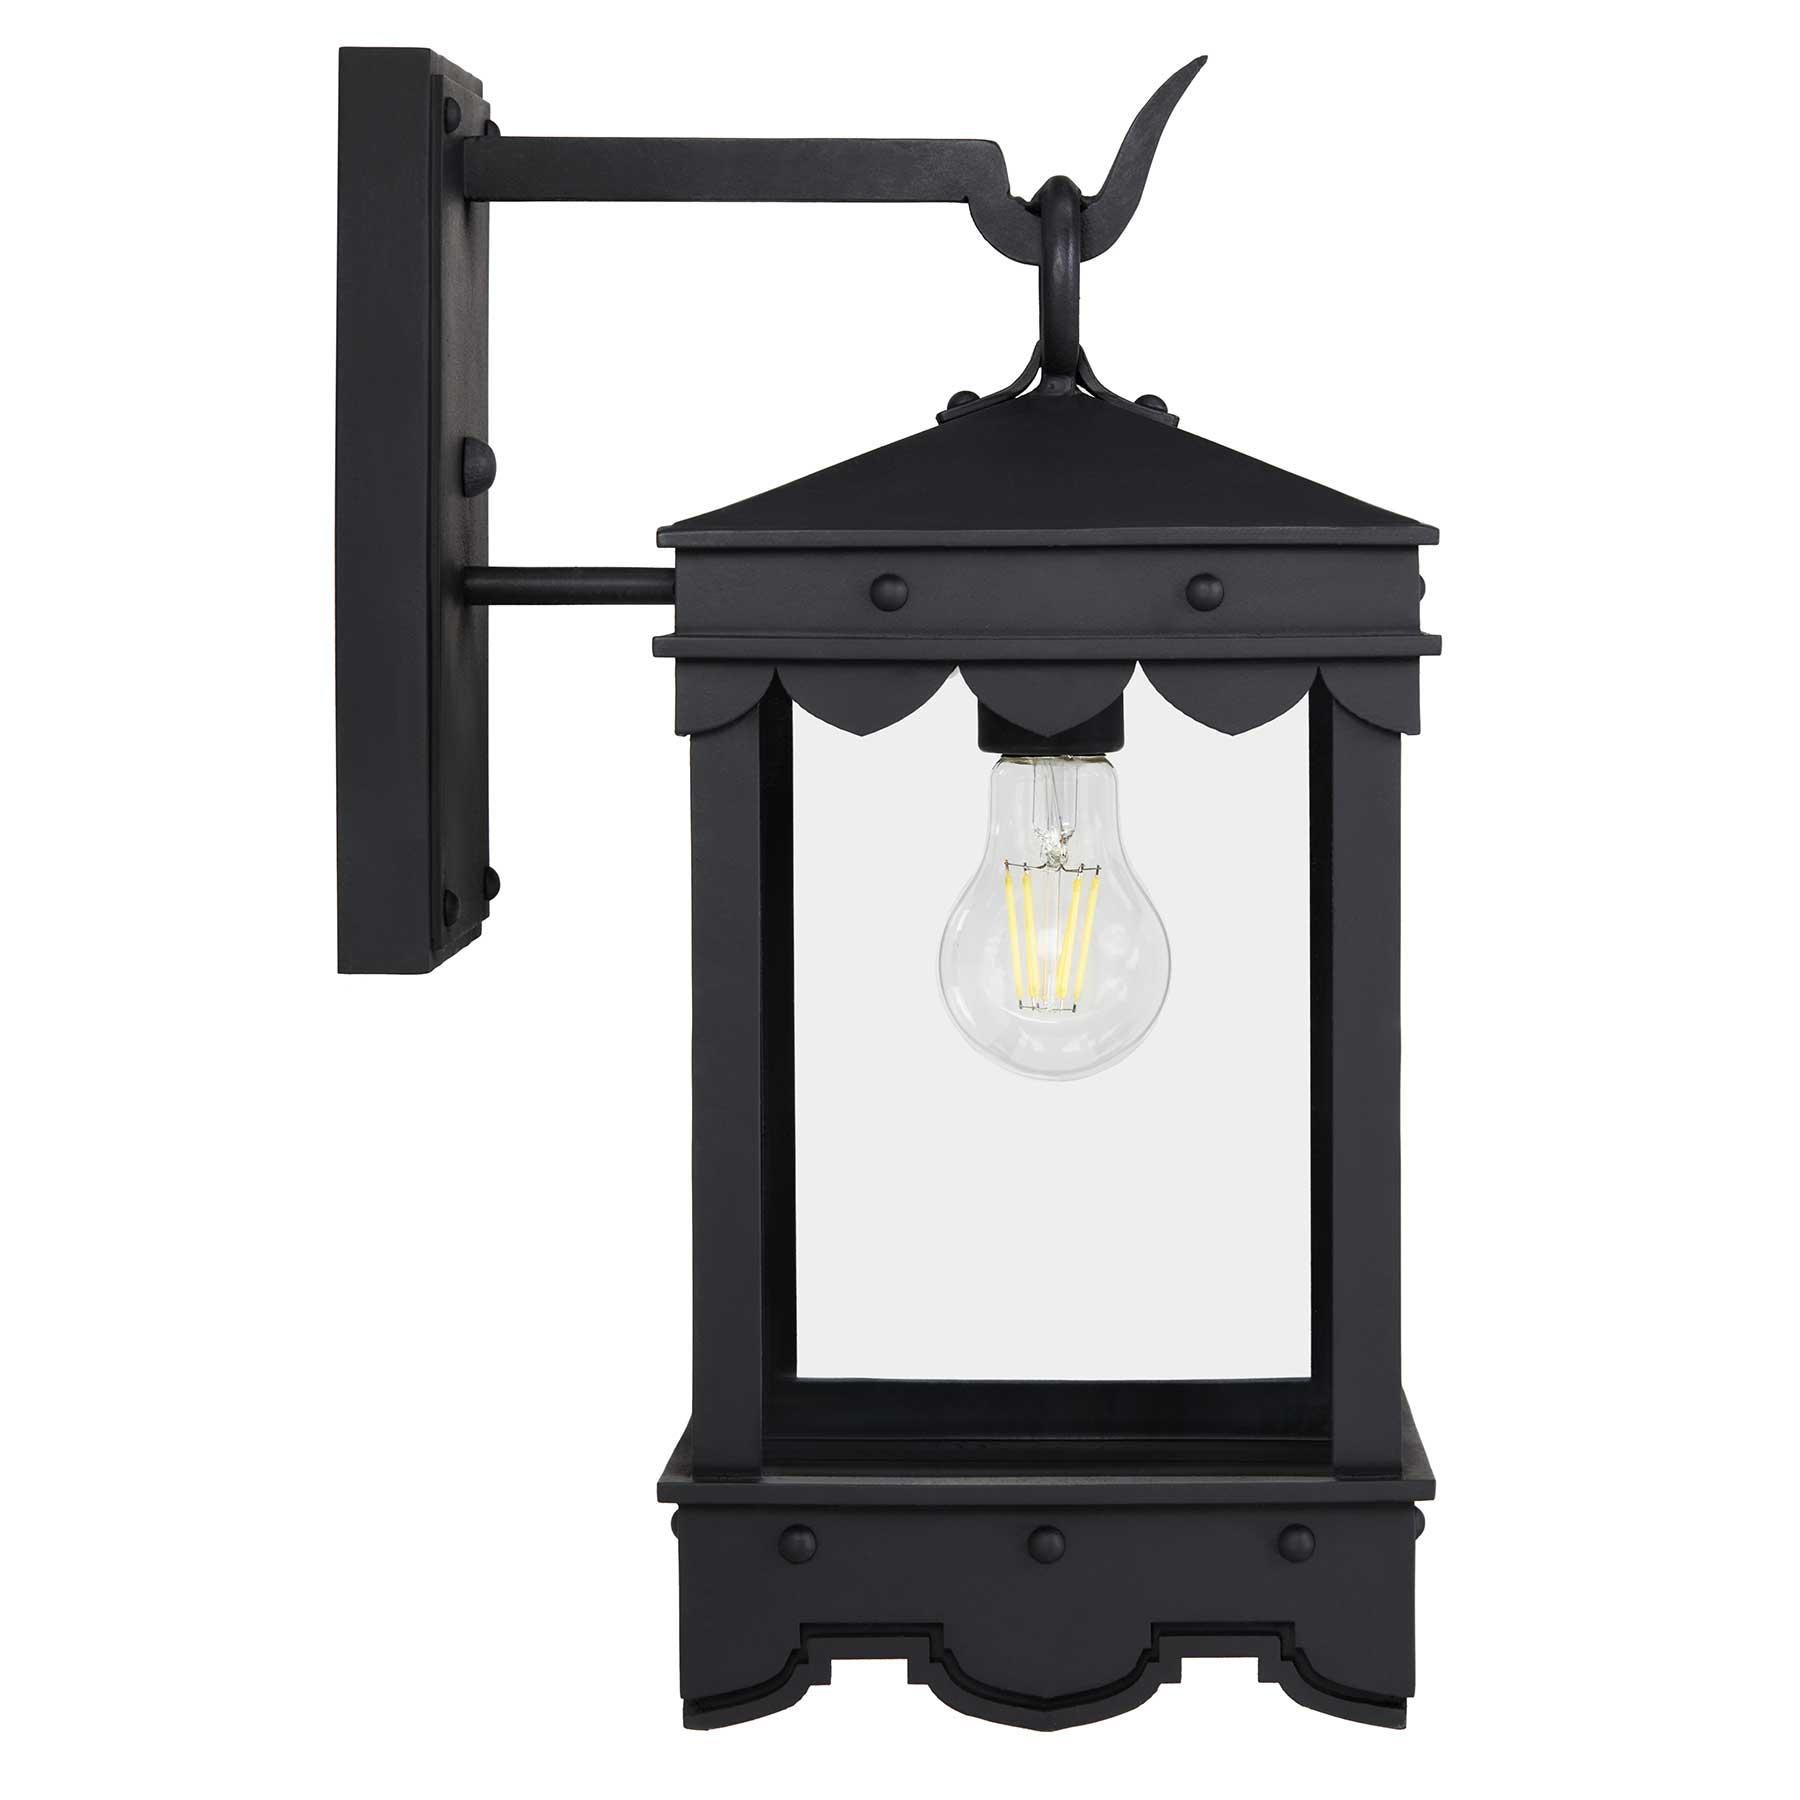 American Contemporary Mediterranean Exterior Arm Mount Lantern, Old World, Antique Glass For Sale